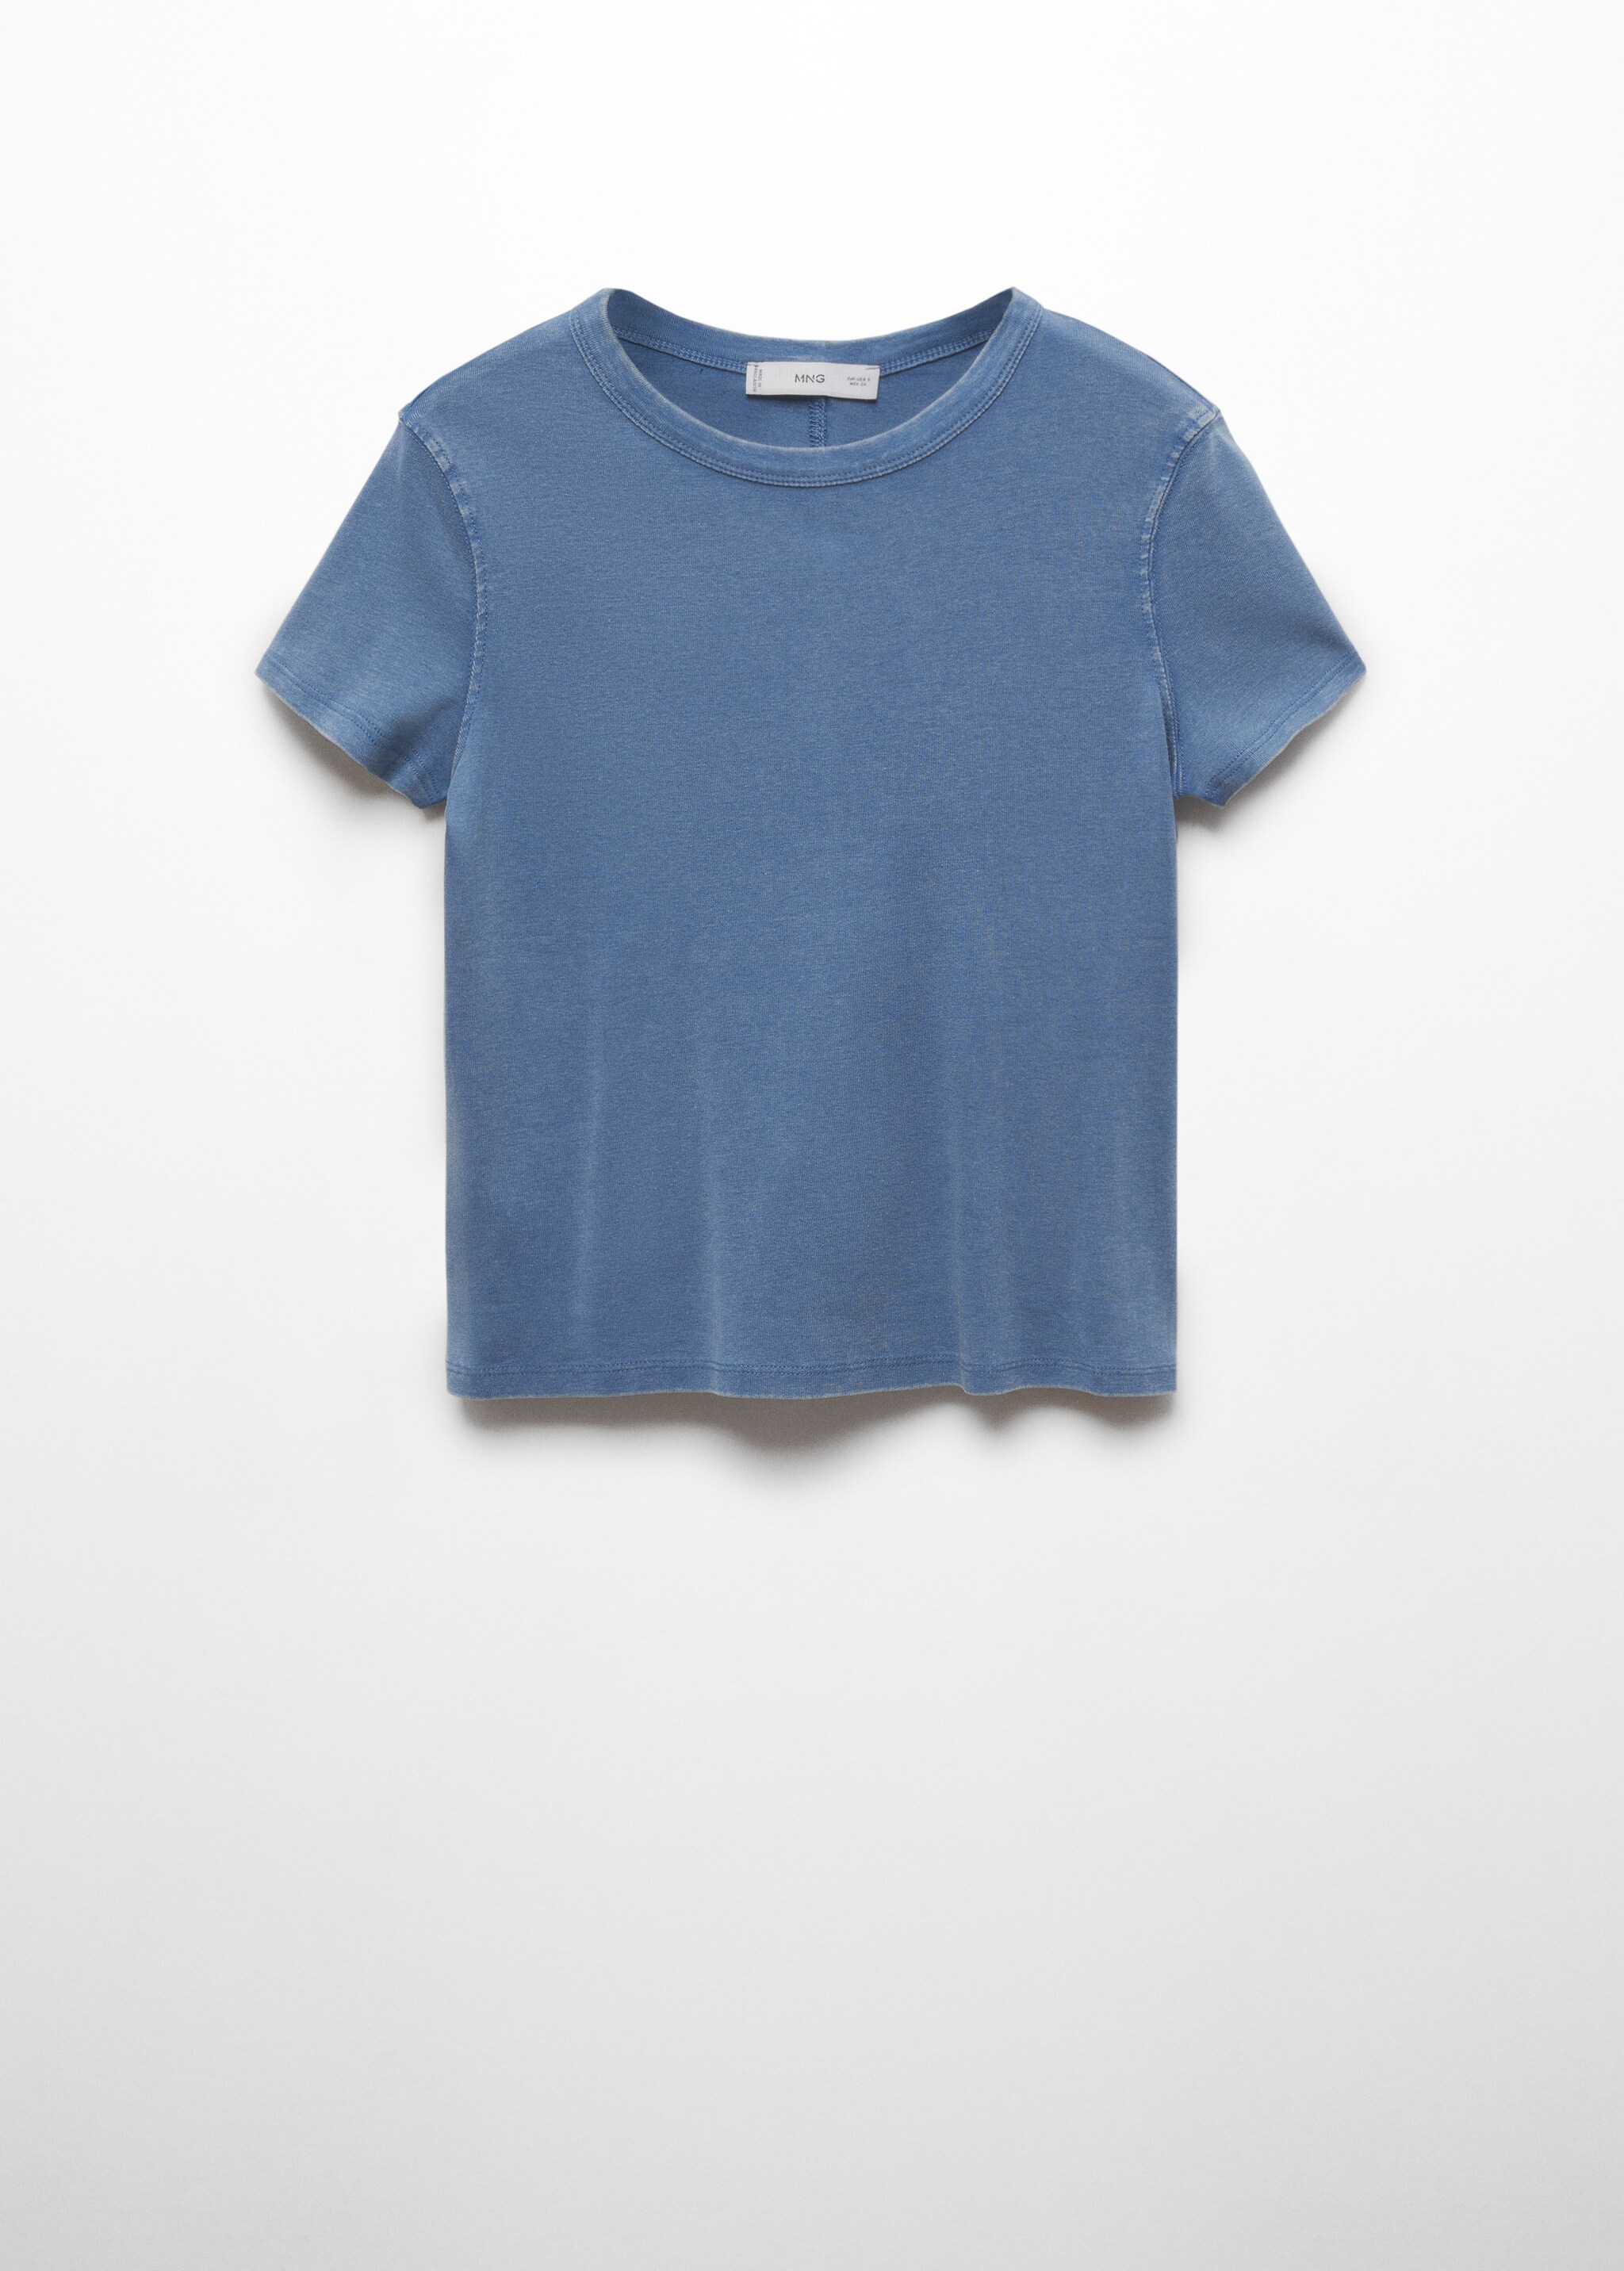 100% cotton T-shirt - Article without model